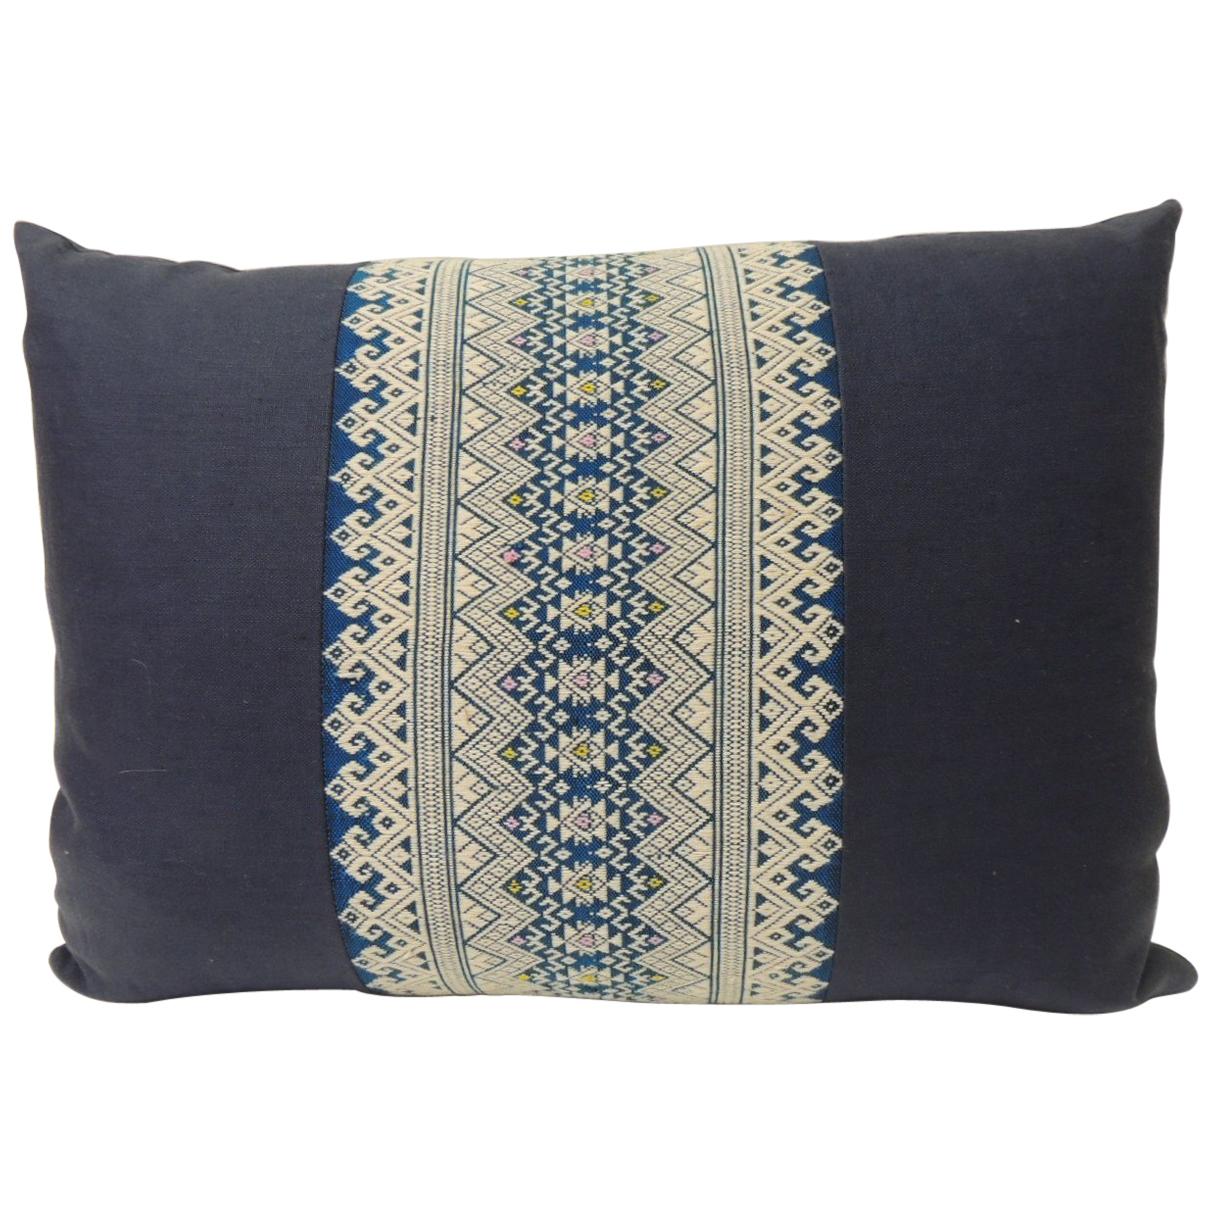 Vintage Blue and White Embroidered Asian Decorative Lumbar Pillow